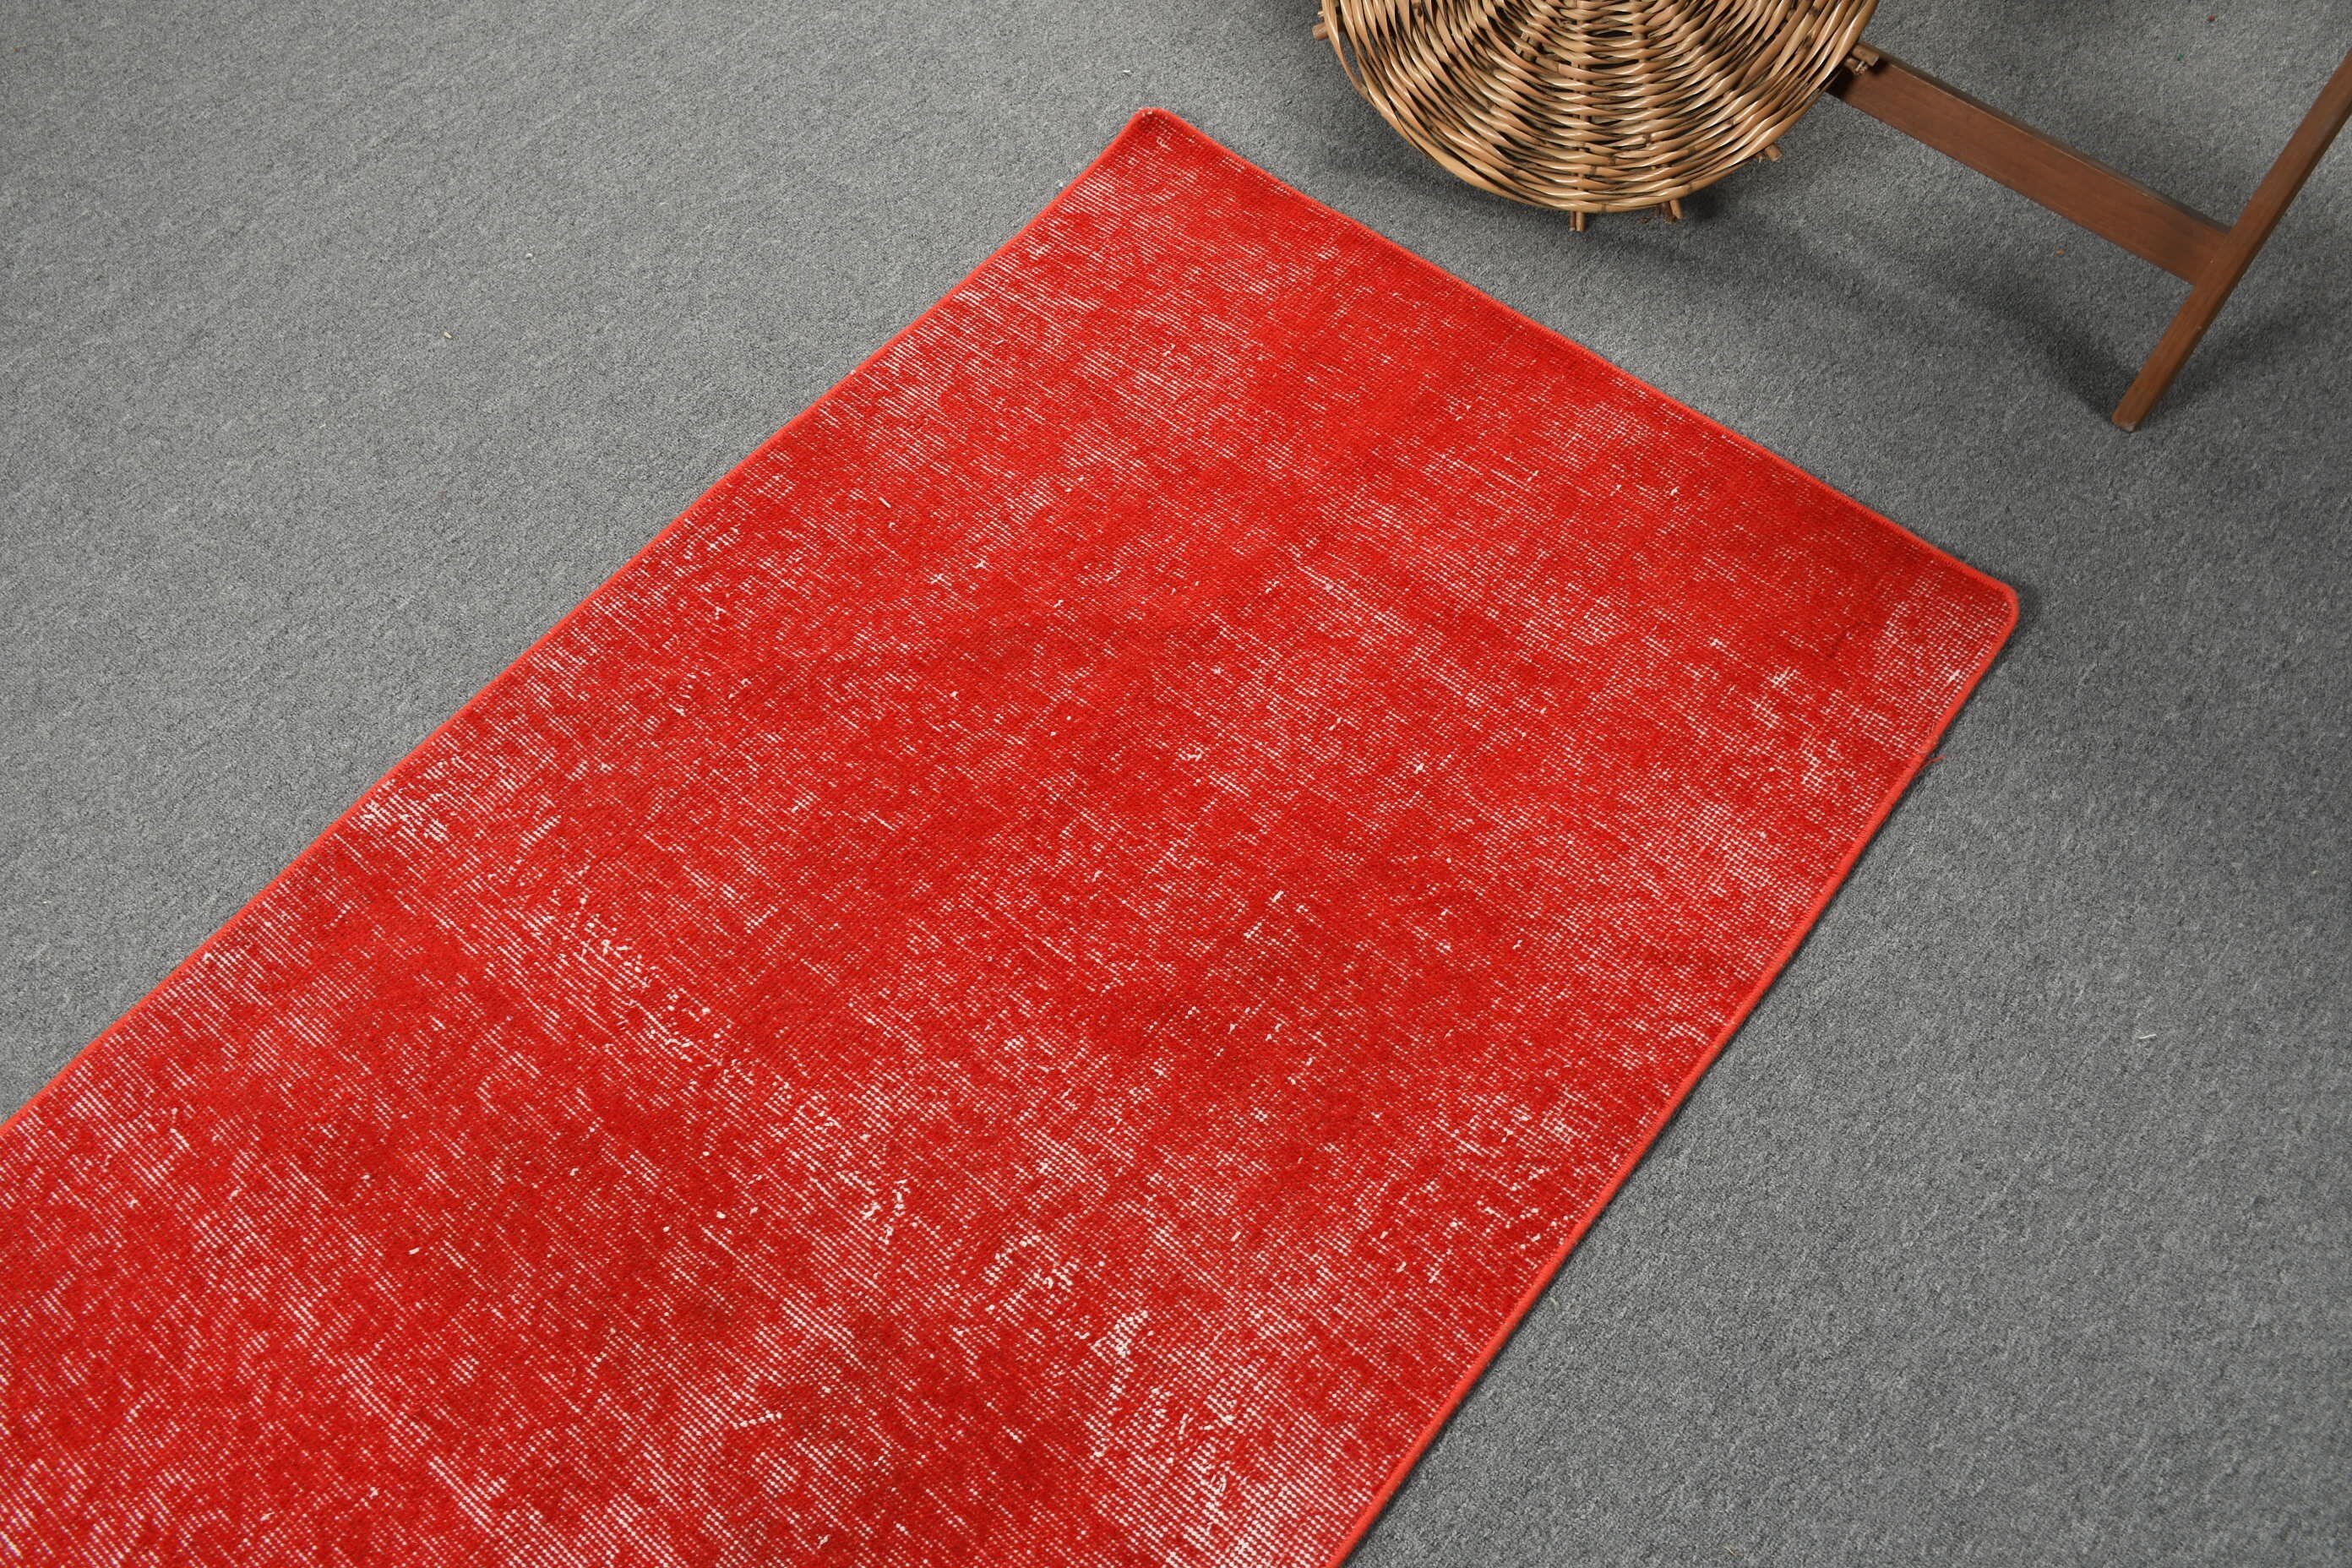 Entry Rugs, Red Home Decor Rug, Vintage Rug, Rugs for Bedroom, Art Rugs, Oriental Rug, 2.8x6.1 ft Accent Rugs, Kitchen Rugs, Turkish Rug